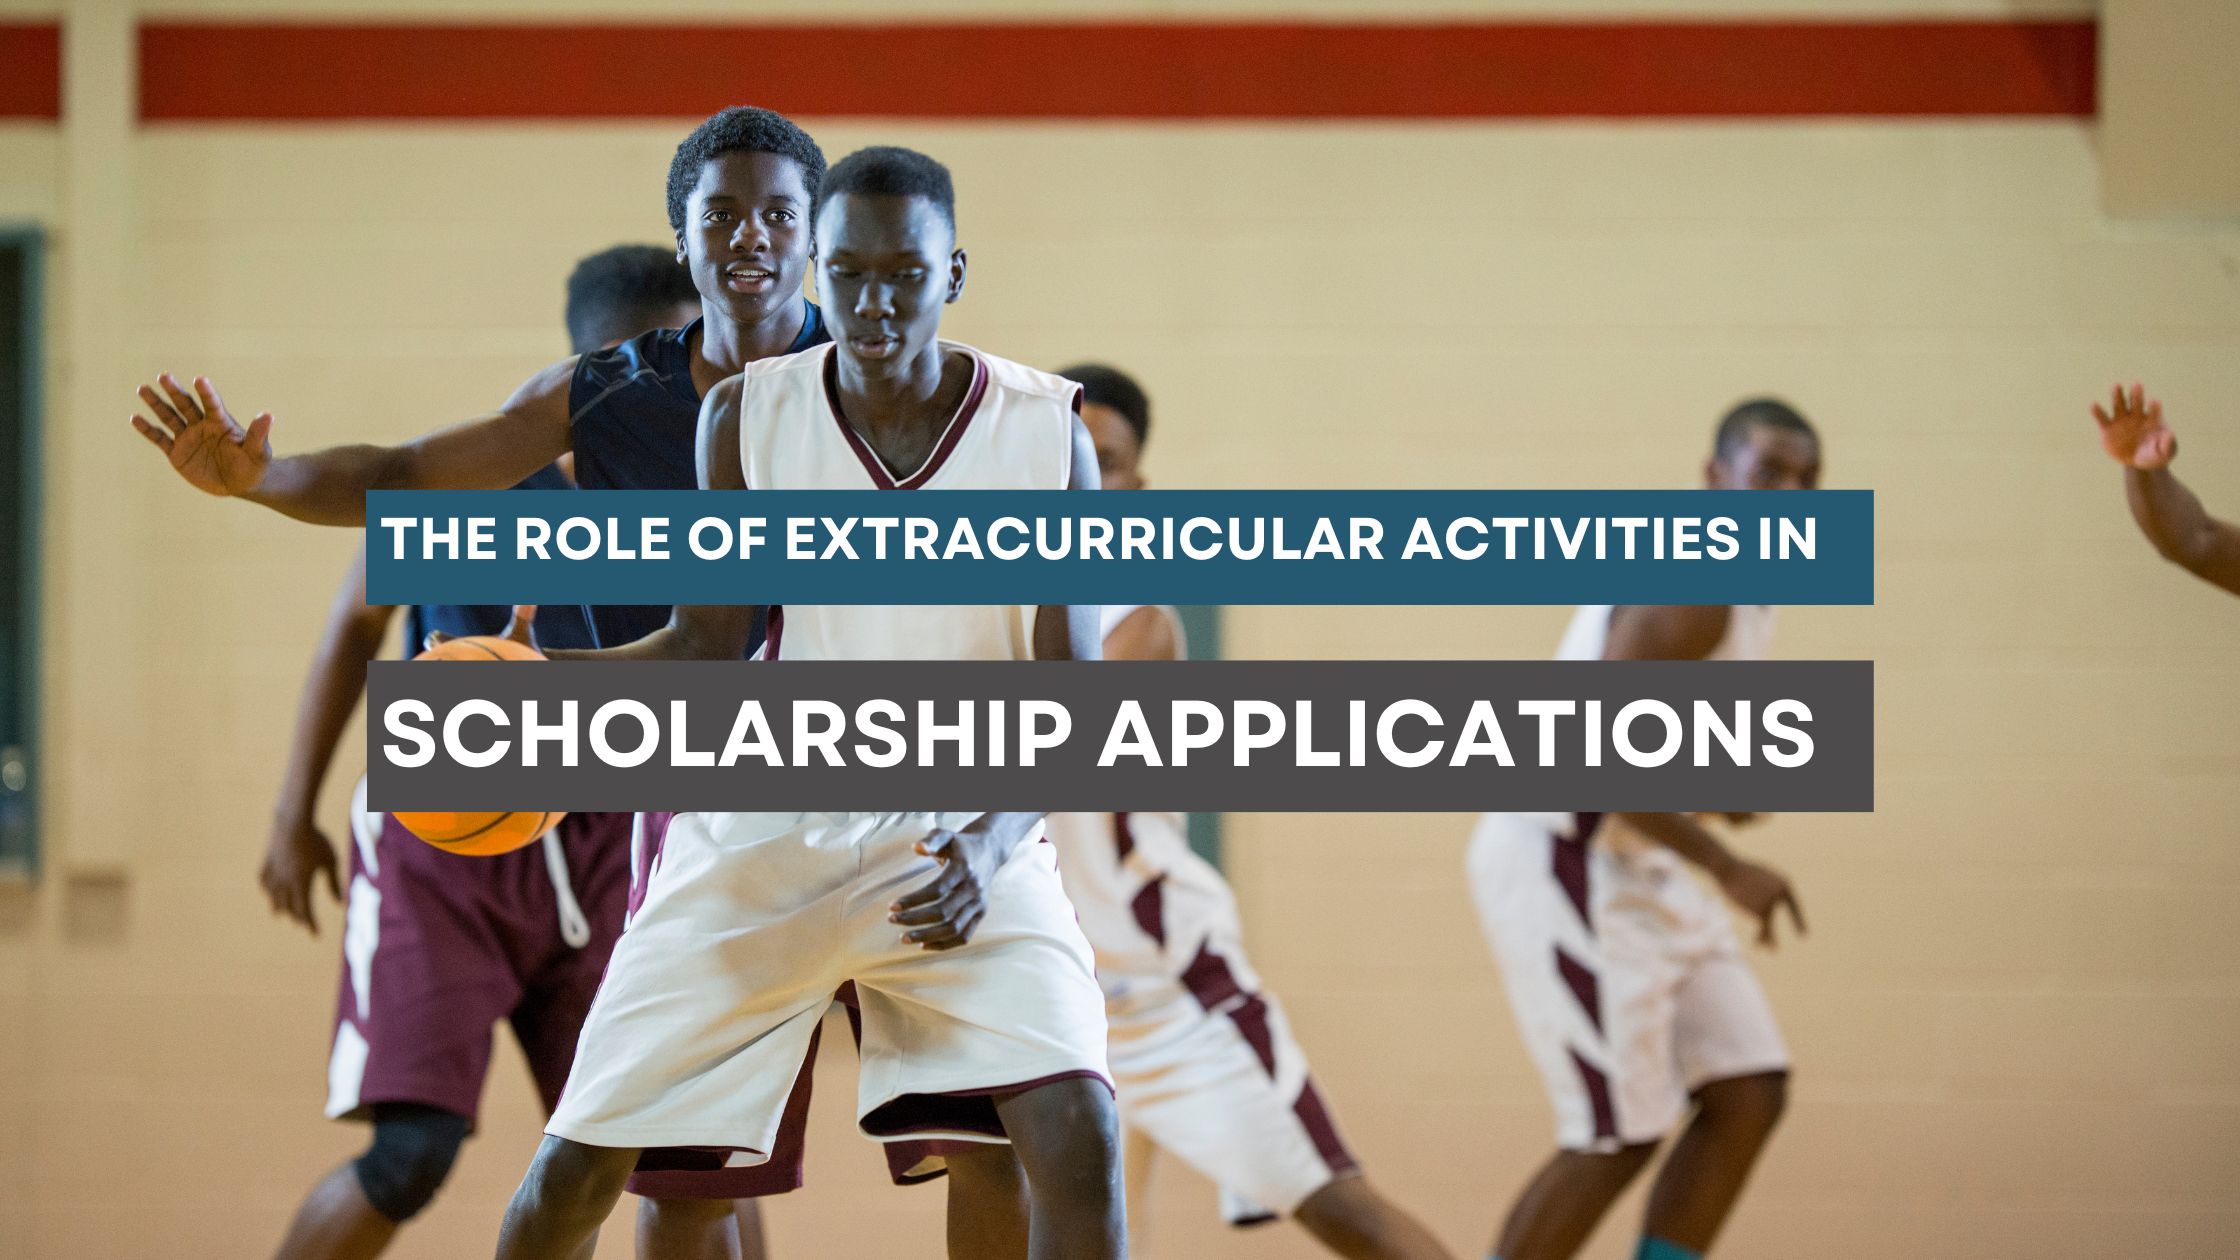 The Role of Extracurricular Activities in Scholarship Applications